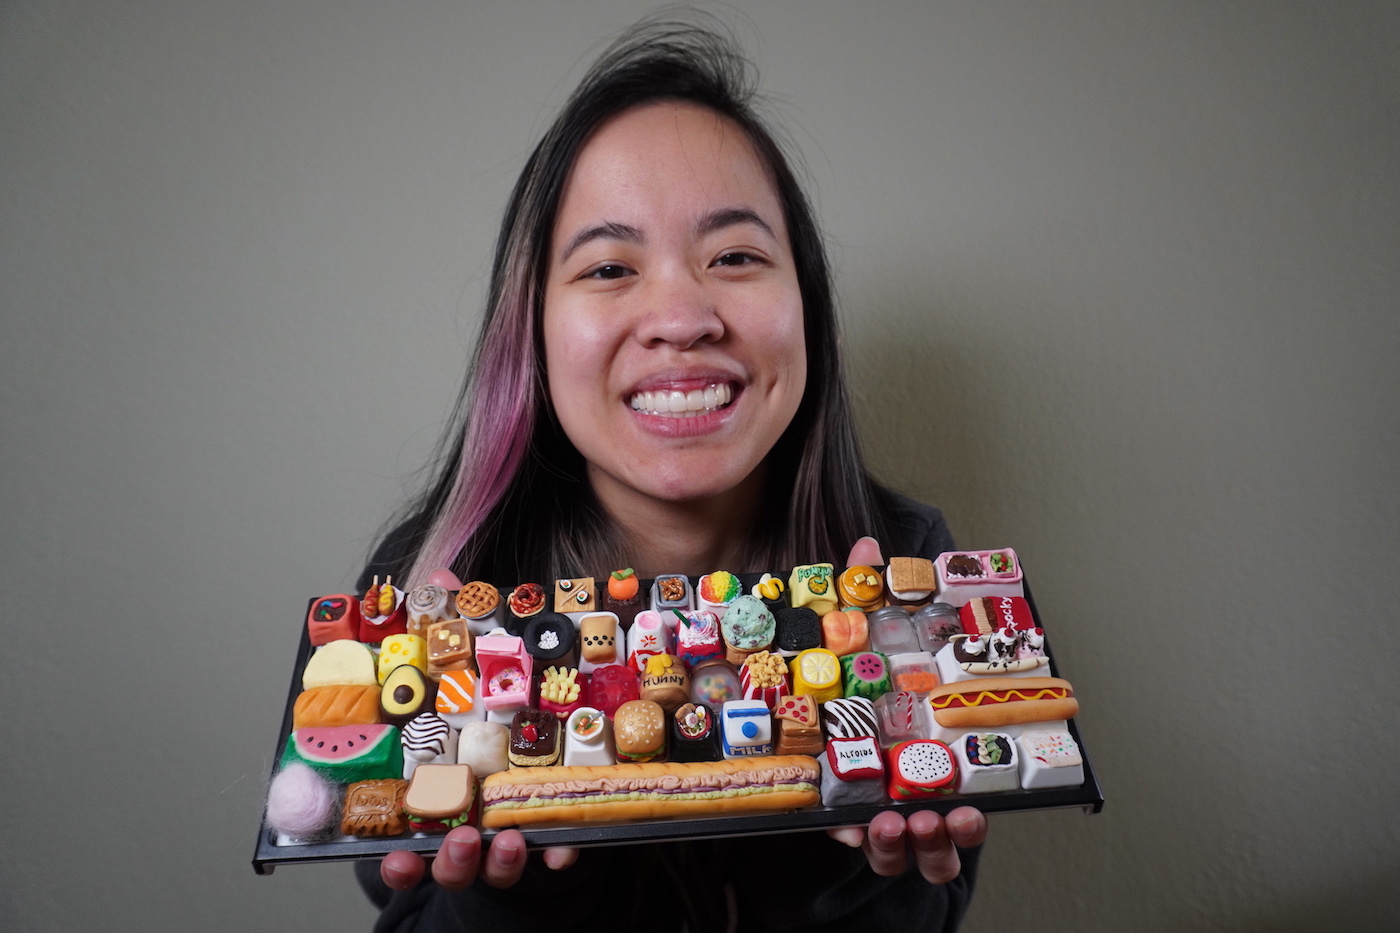 She Quit Her Corporate Job To Make Artisan Keycaps